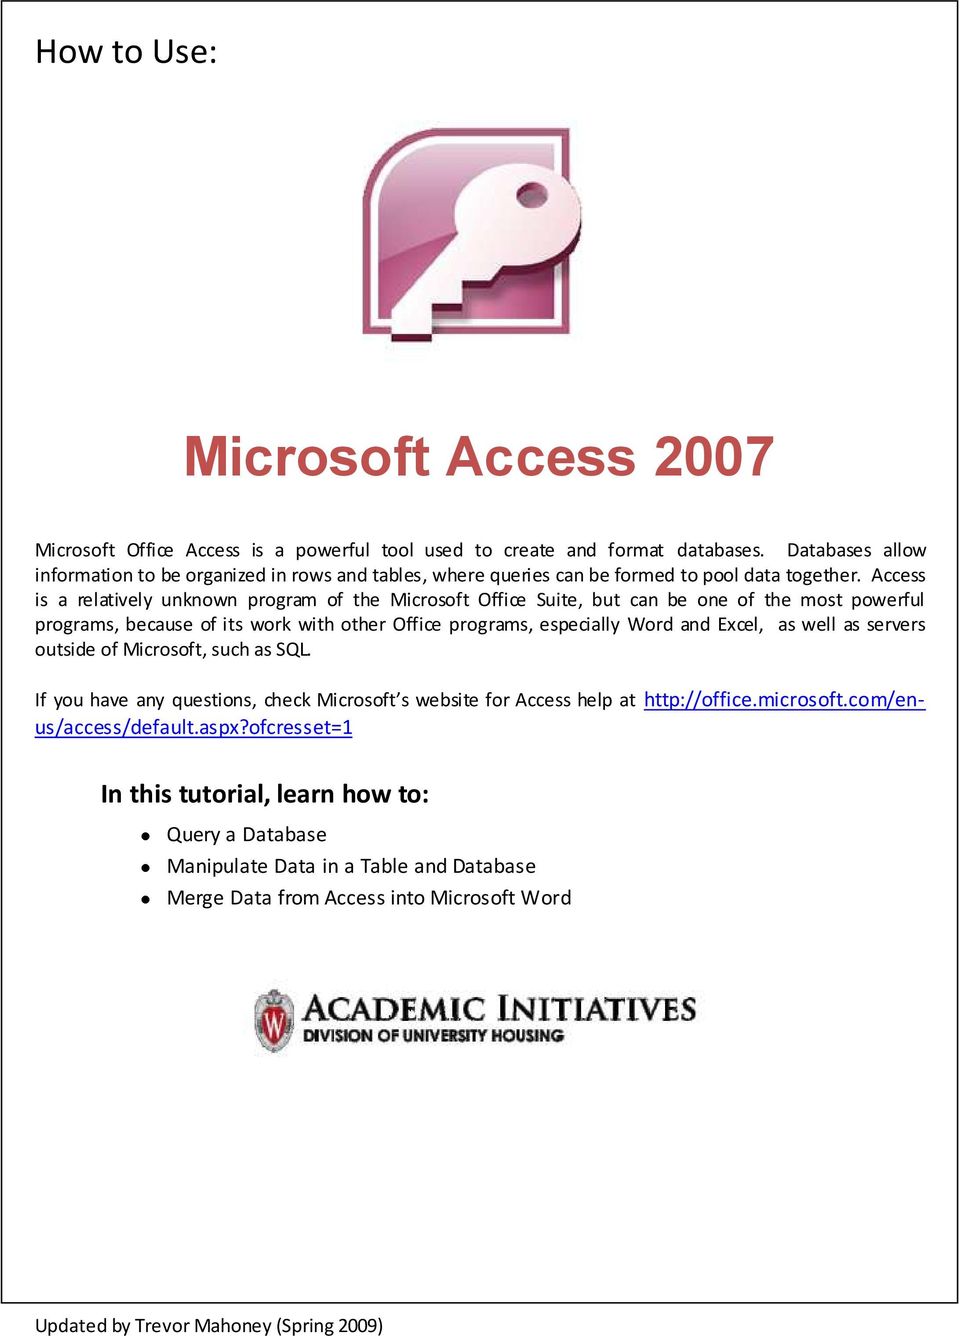 Access is a relatively unknown program of the Microsoft Office Suite, but can be one of the most powerful programs, because of its work with other Office programs, especially Word and Excel, as